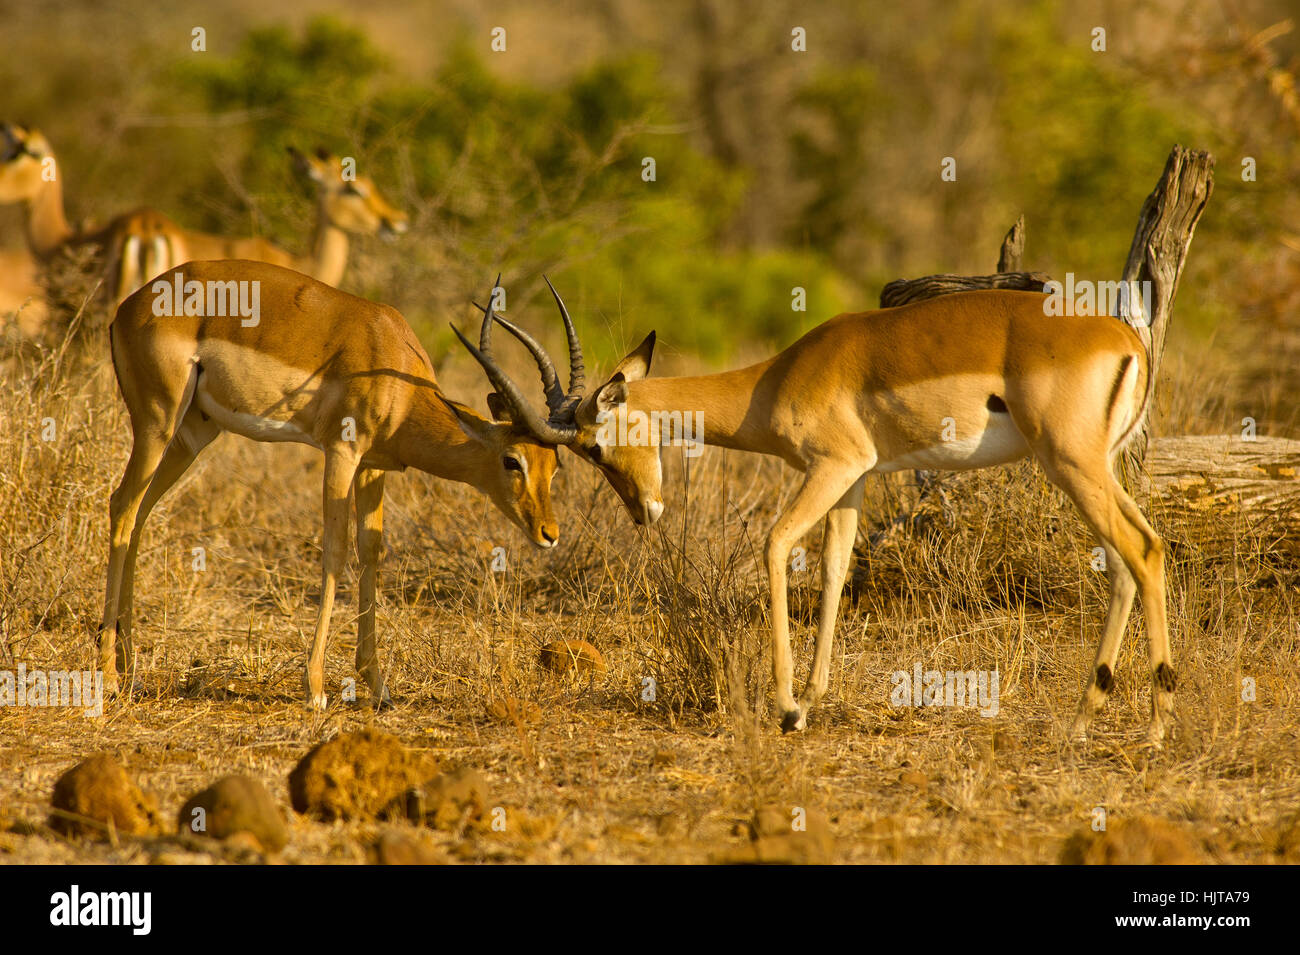 Impalas fighting, Kruger National Park, South Africa Stock Photo